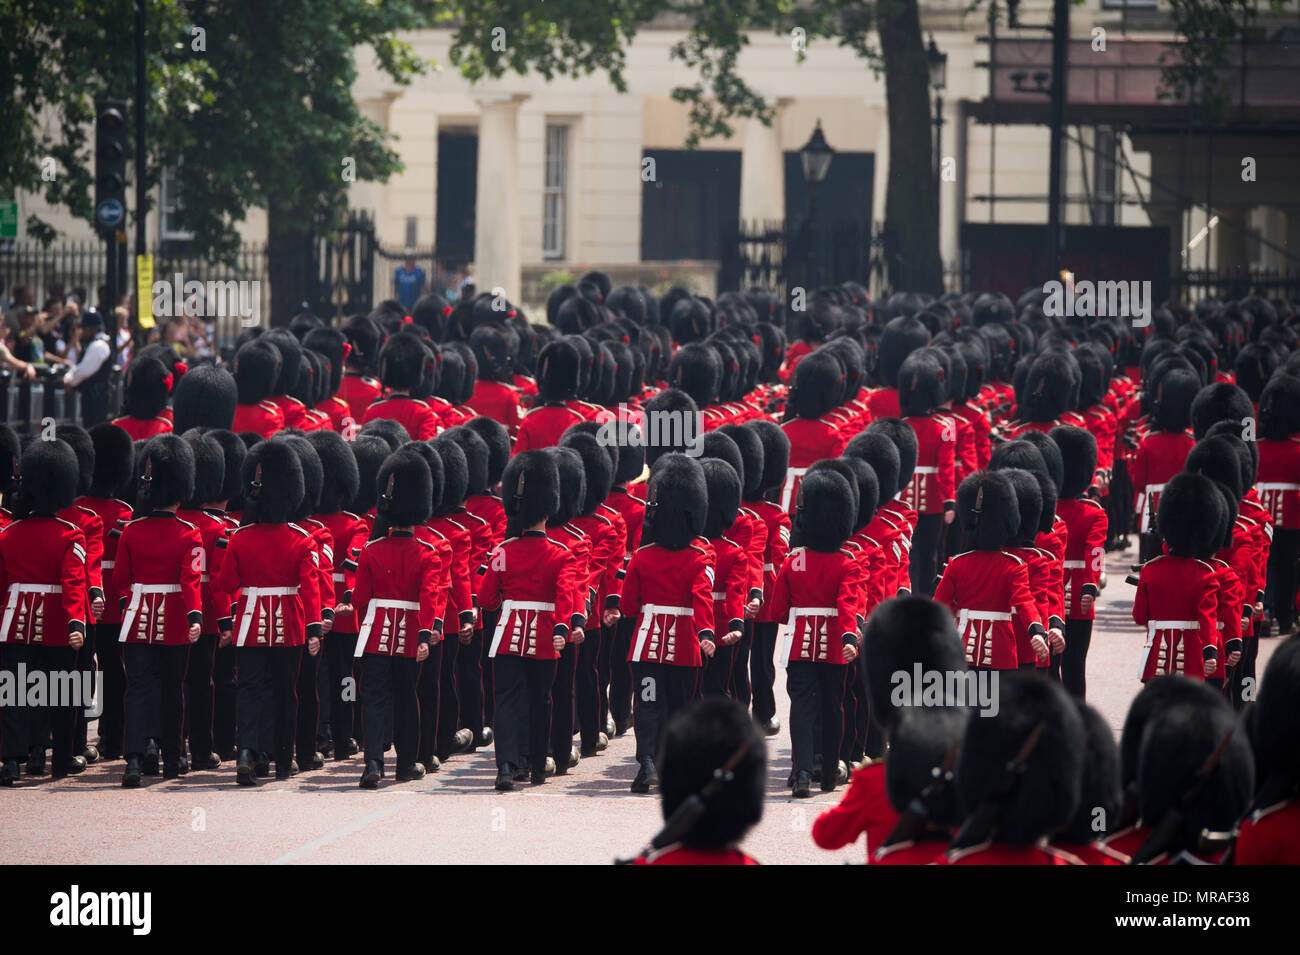 The Mall, London, UK. 26 May, 2018. Major General’s Review is held in sweltering heat, the penultimate rehearsal for the Queen’s Birthday Parade, also known as Trooping the Colour. 1400 soldiers from the Household Division and the King’s Troop Royal Horse Artillery take part in this first full scale rehearsal. Credit: Malcolm Park/Alamy Live News. Stock Photo